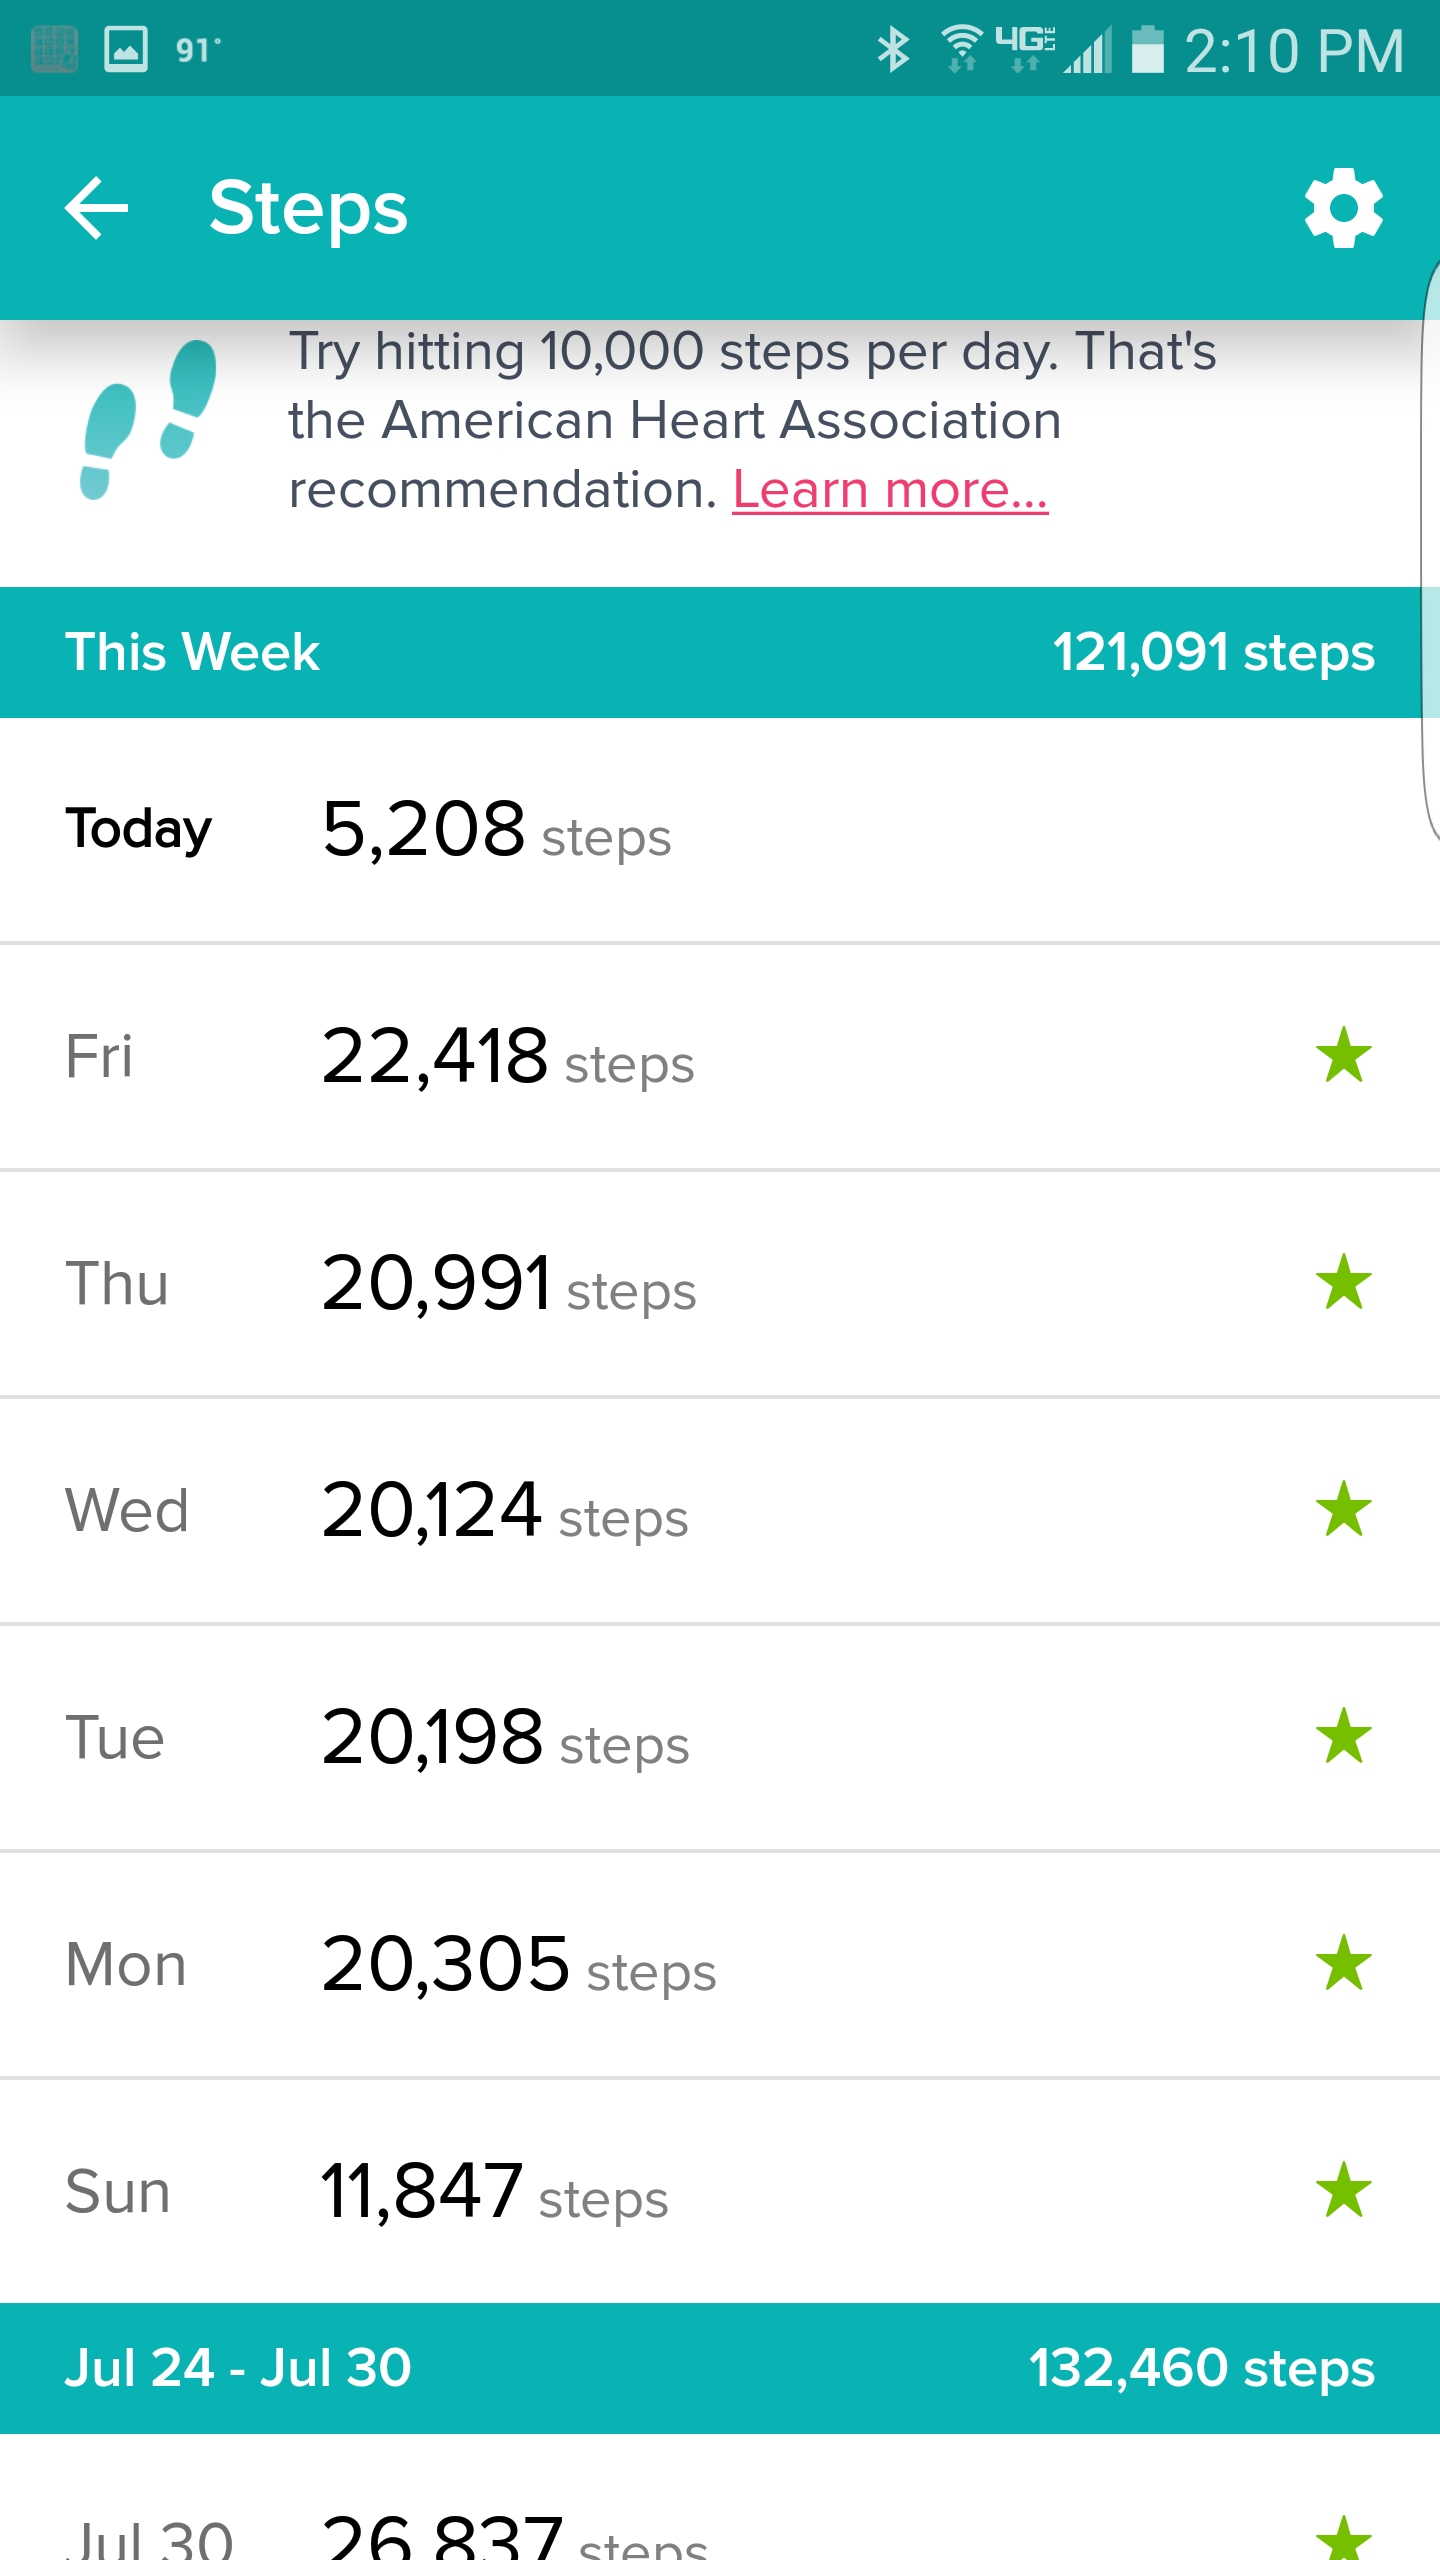 Actual_Steps_During_the_Week